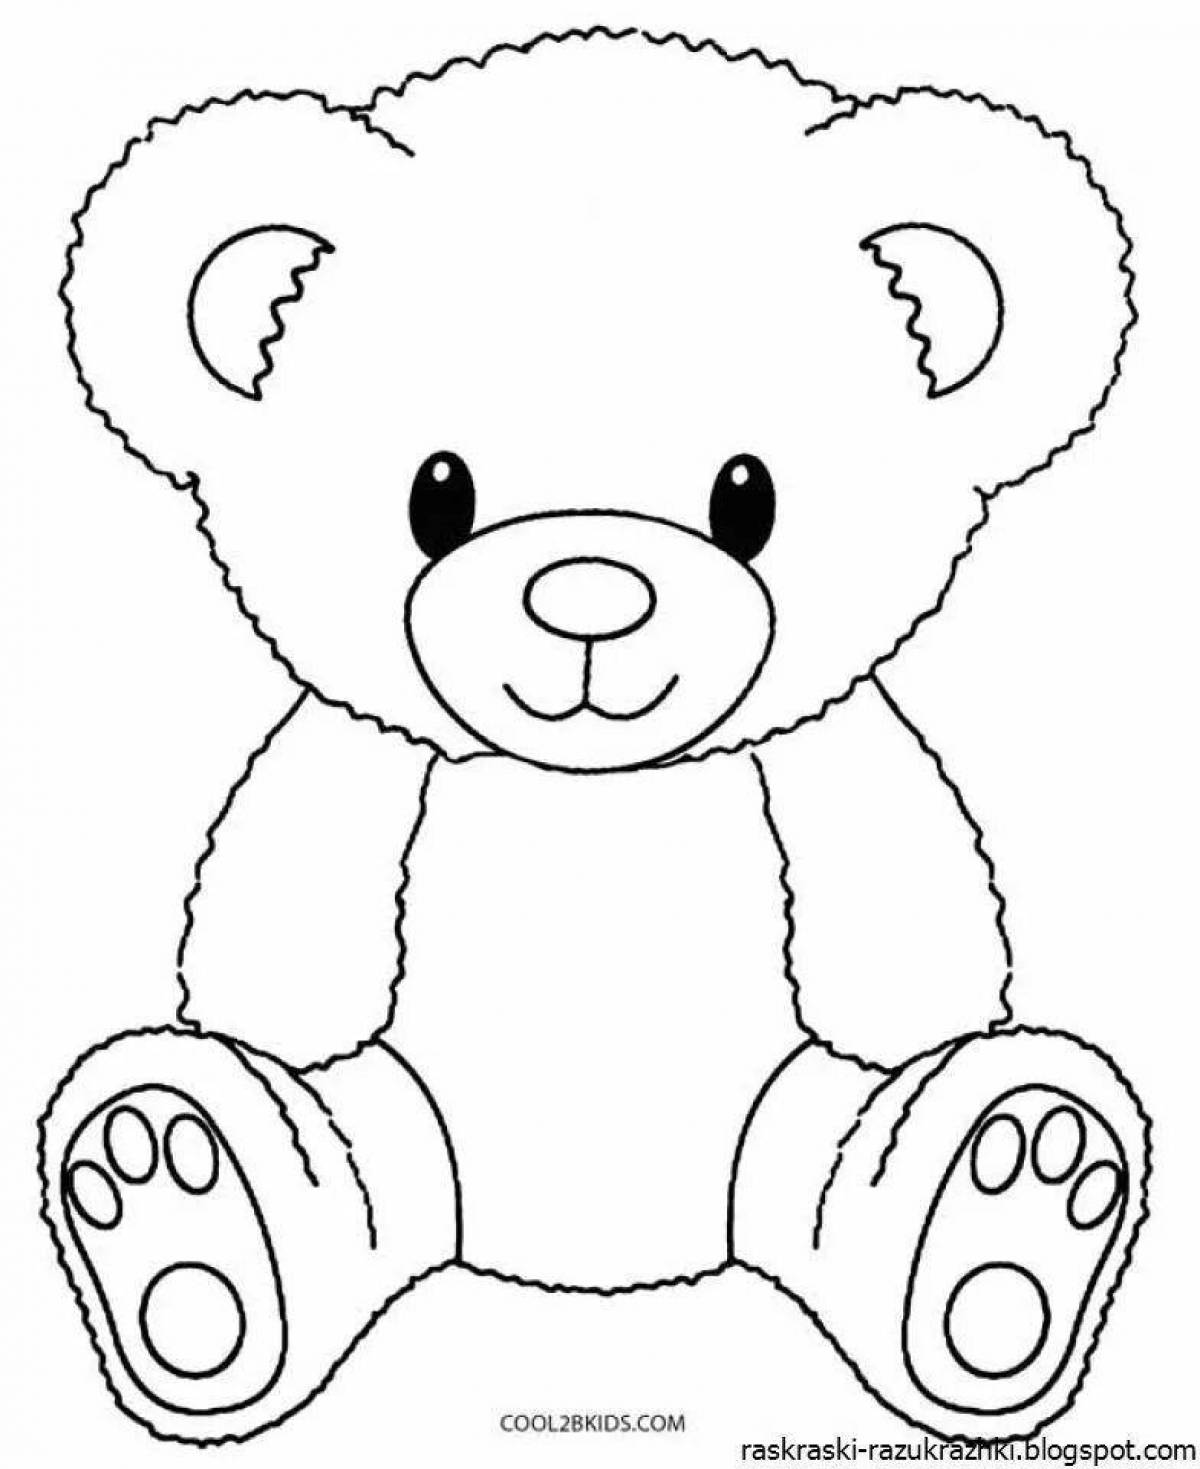 Colorful coloring bear for children 3-4 years old